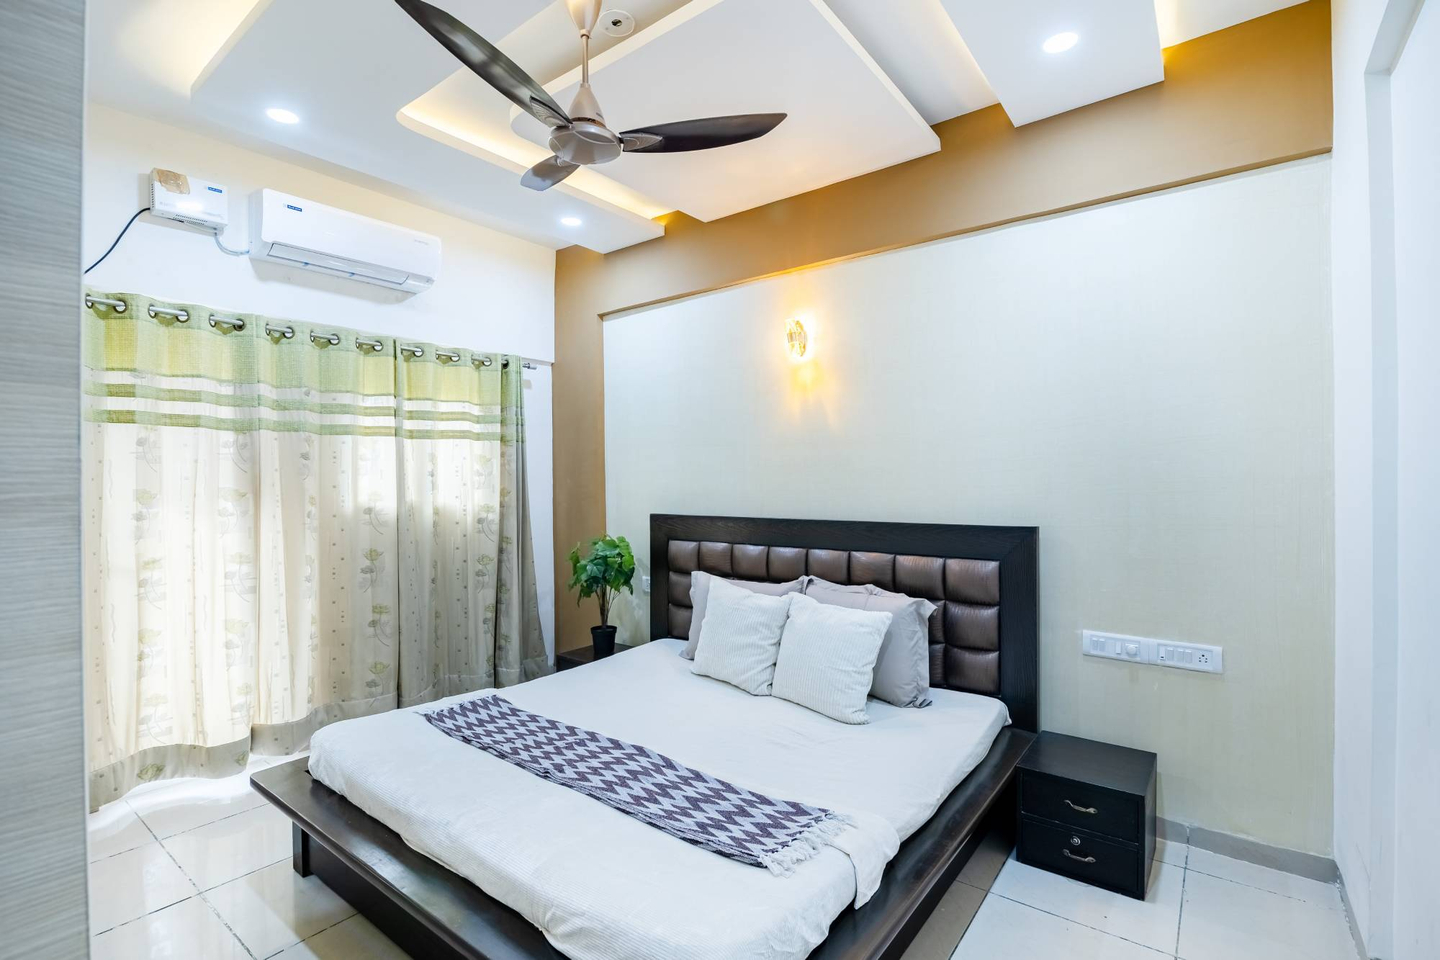 Guest Room With False Ceiling - Livspace